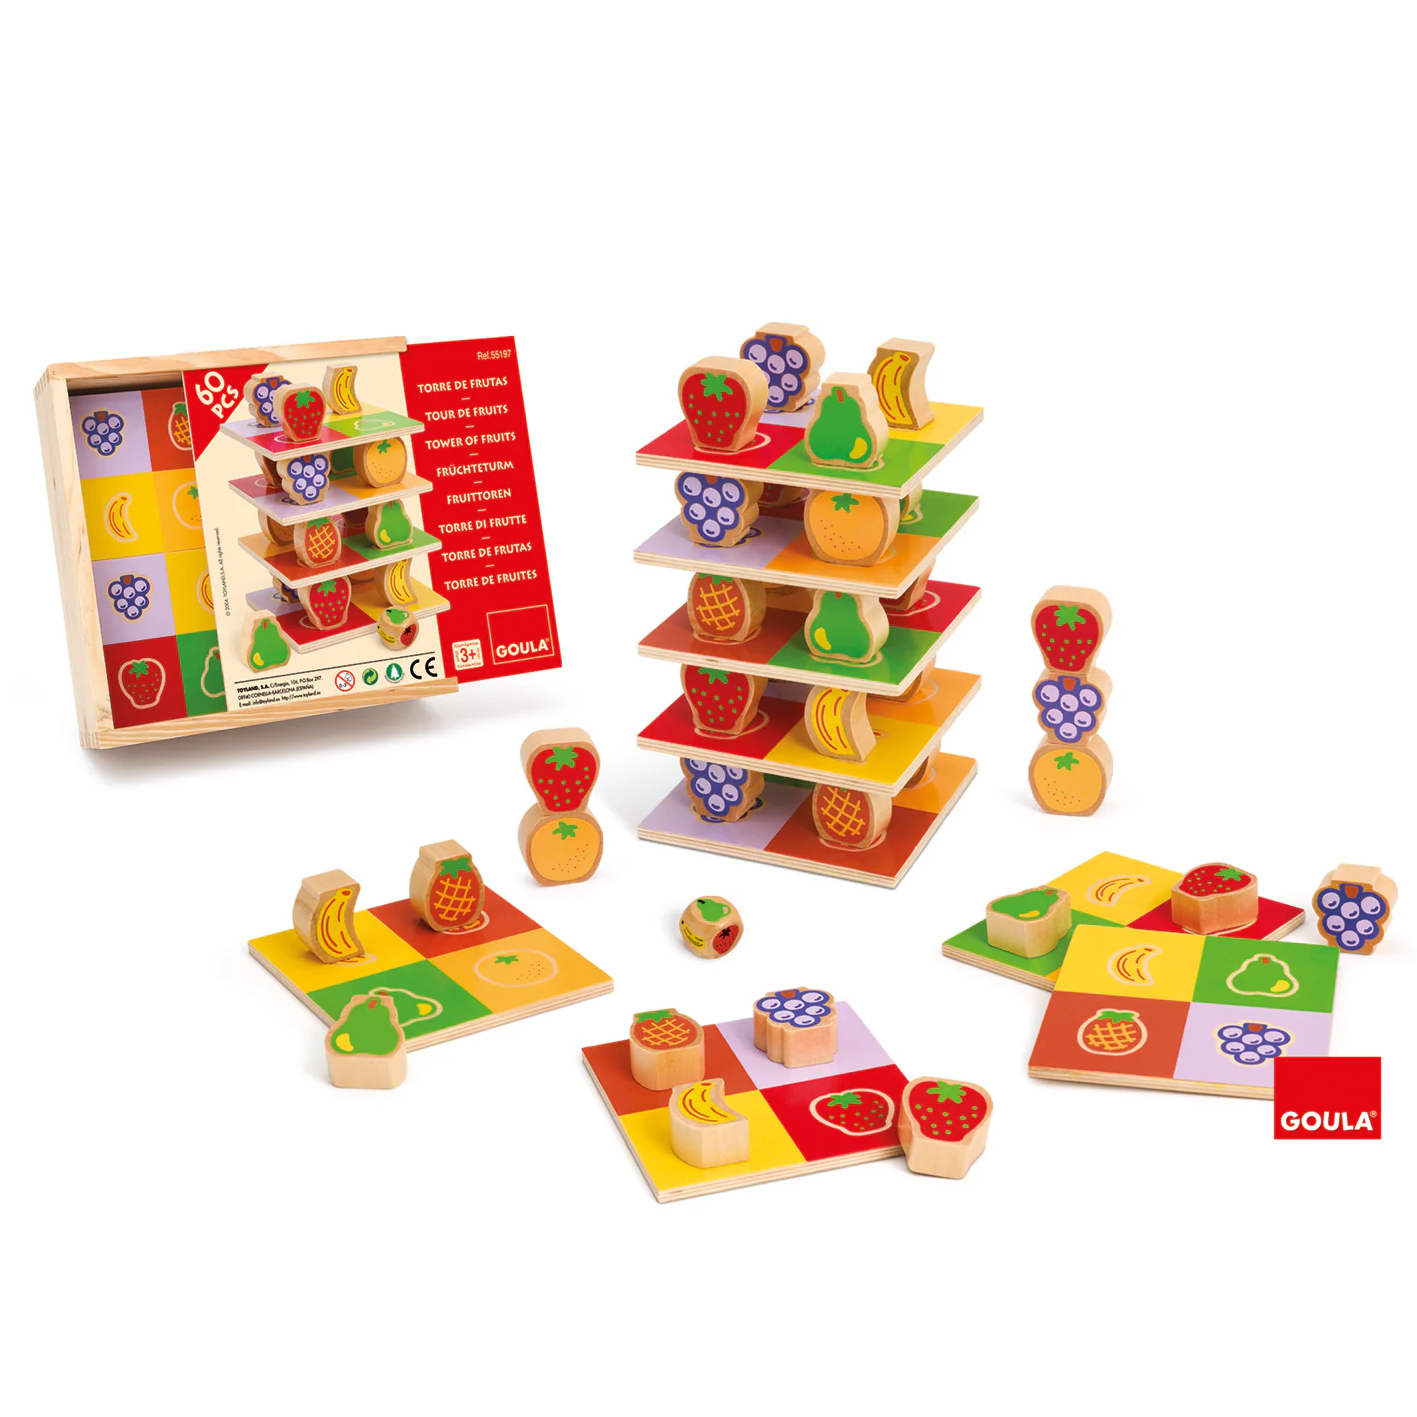 Goula Tower of Fruits Color & Number Stacking Game 水果塔配對疊高遊戲